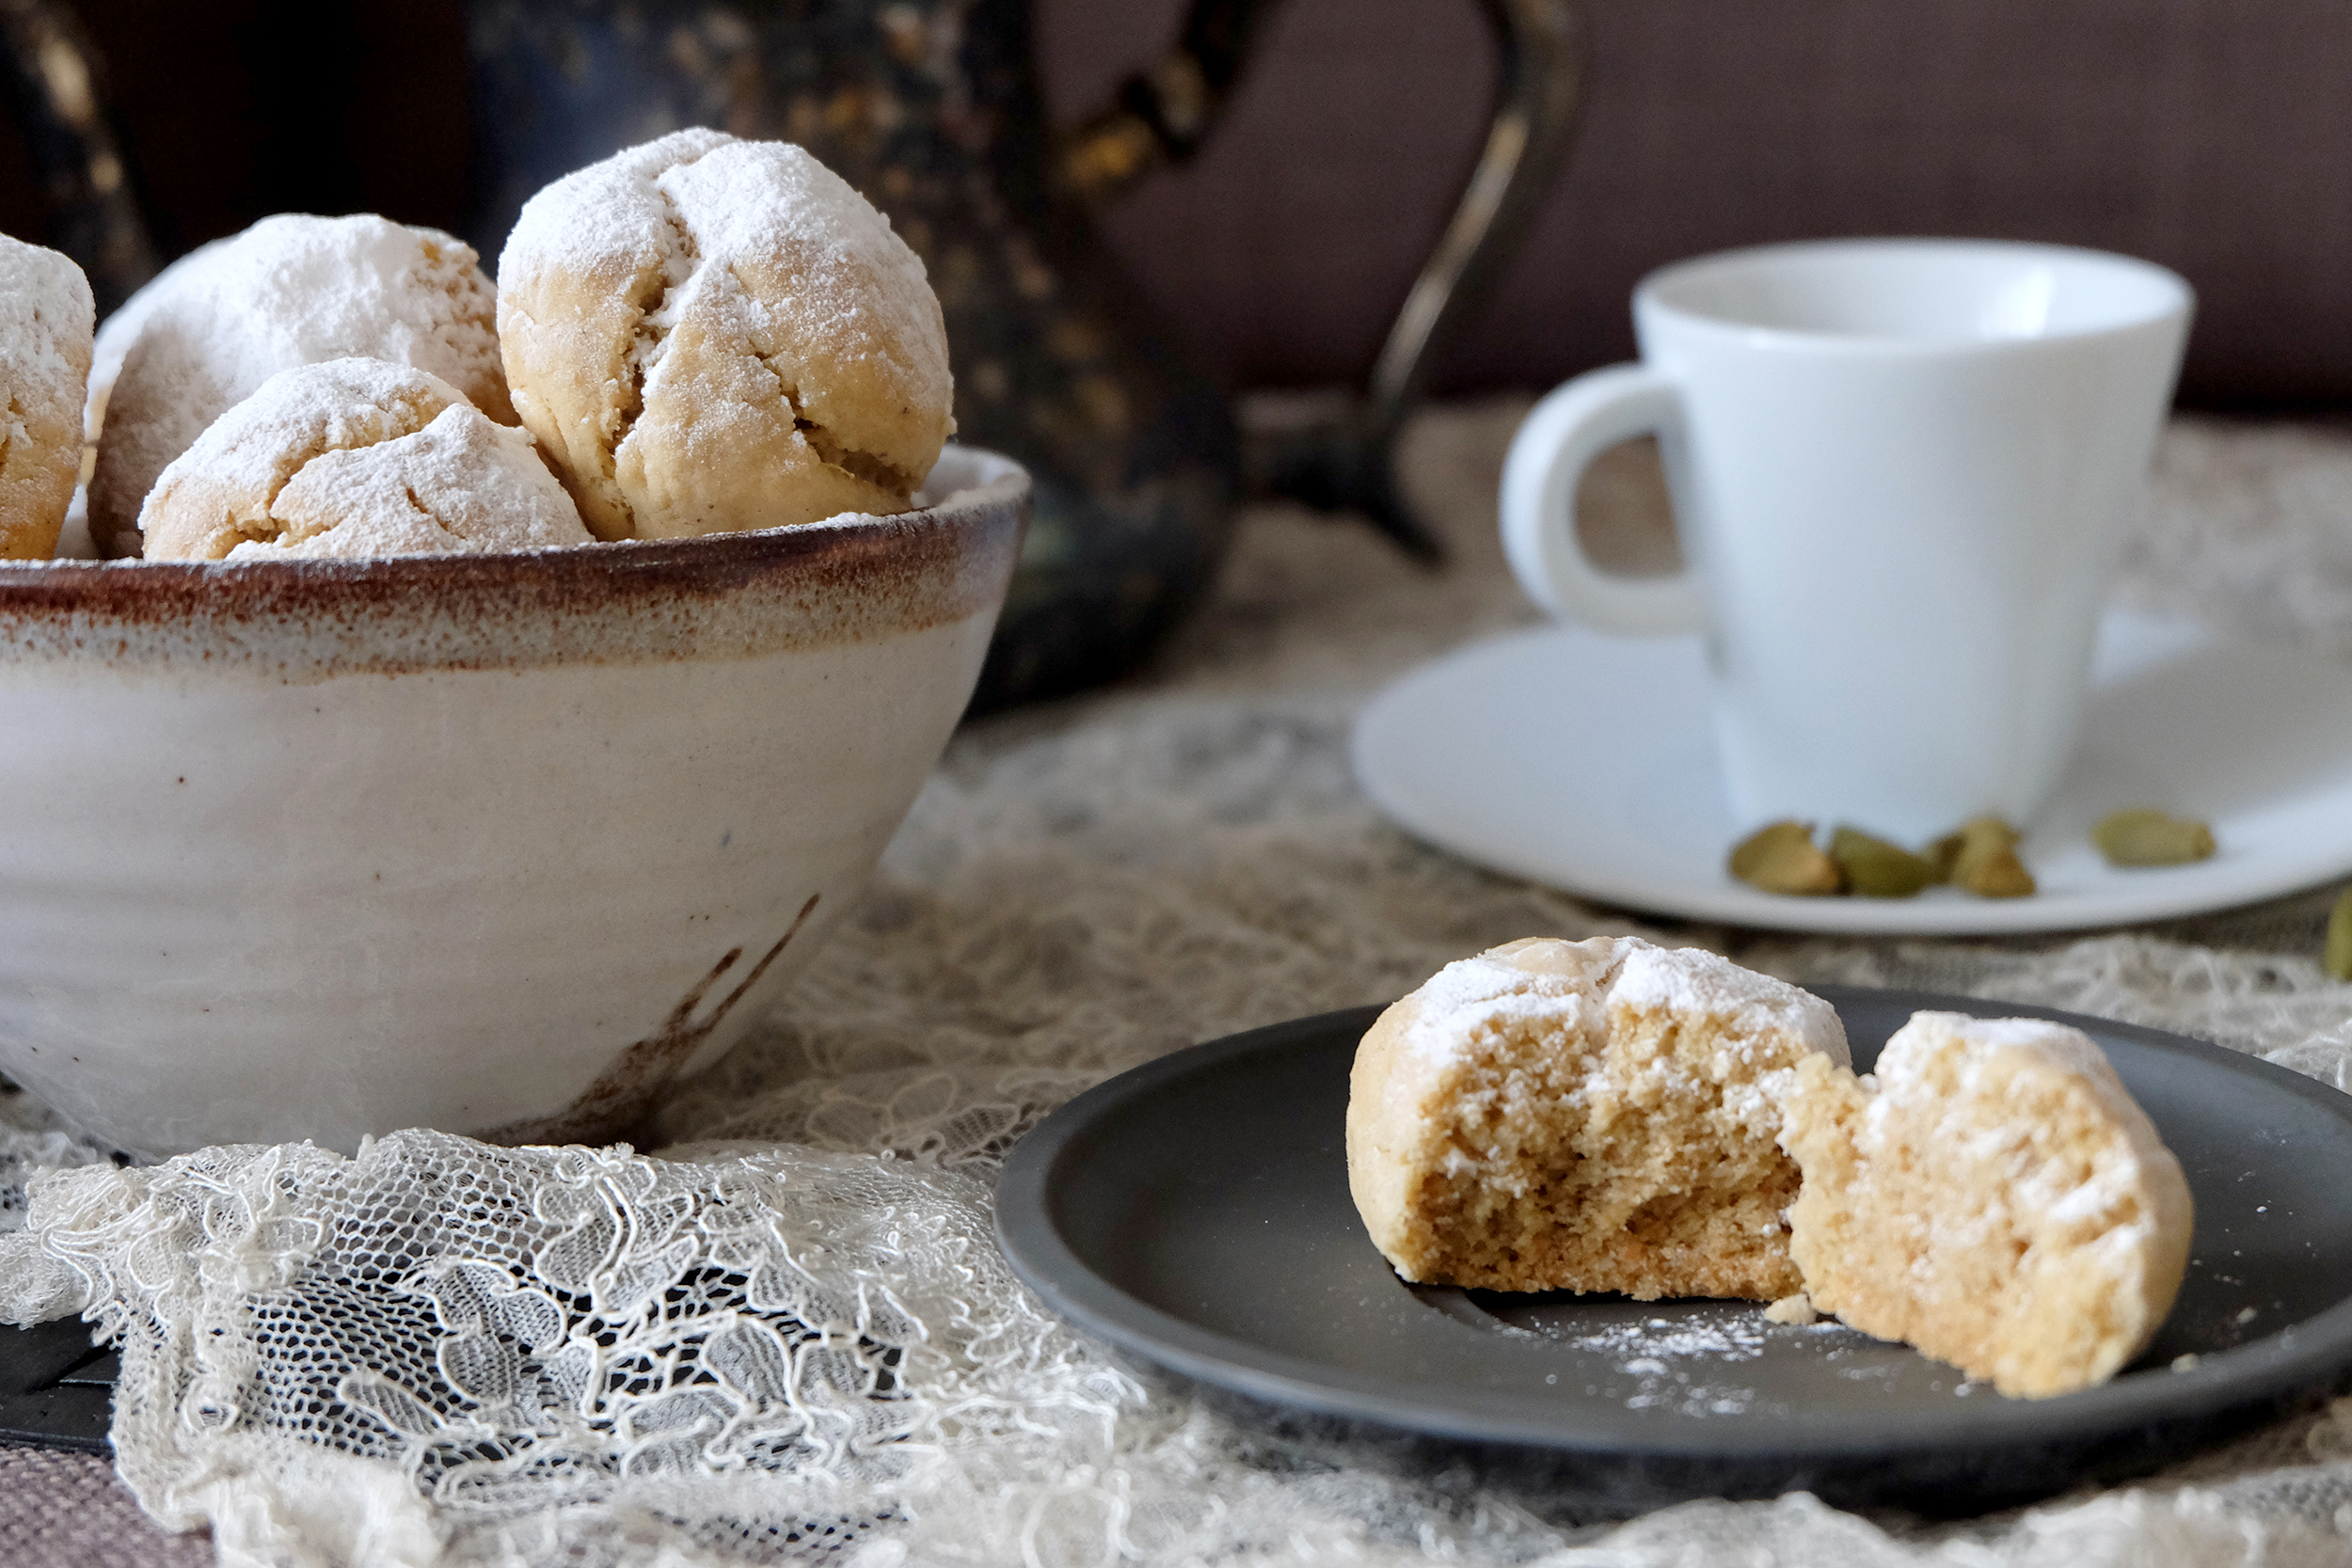 A recipe – Cardamom, coffee and cashew nuts biscuits